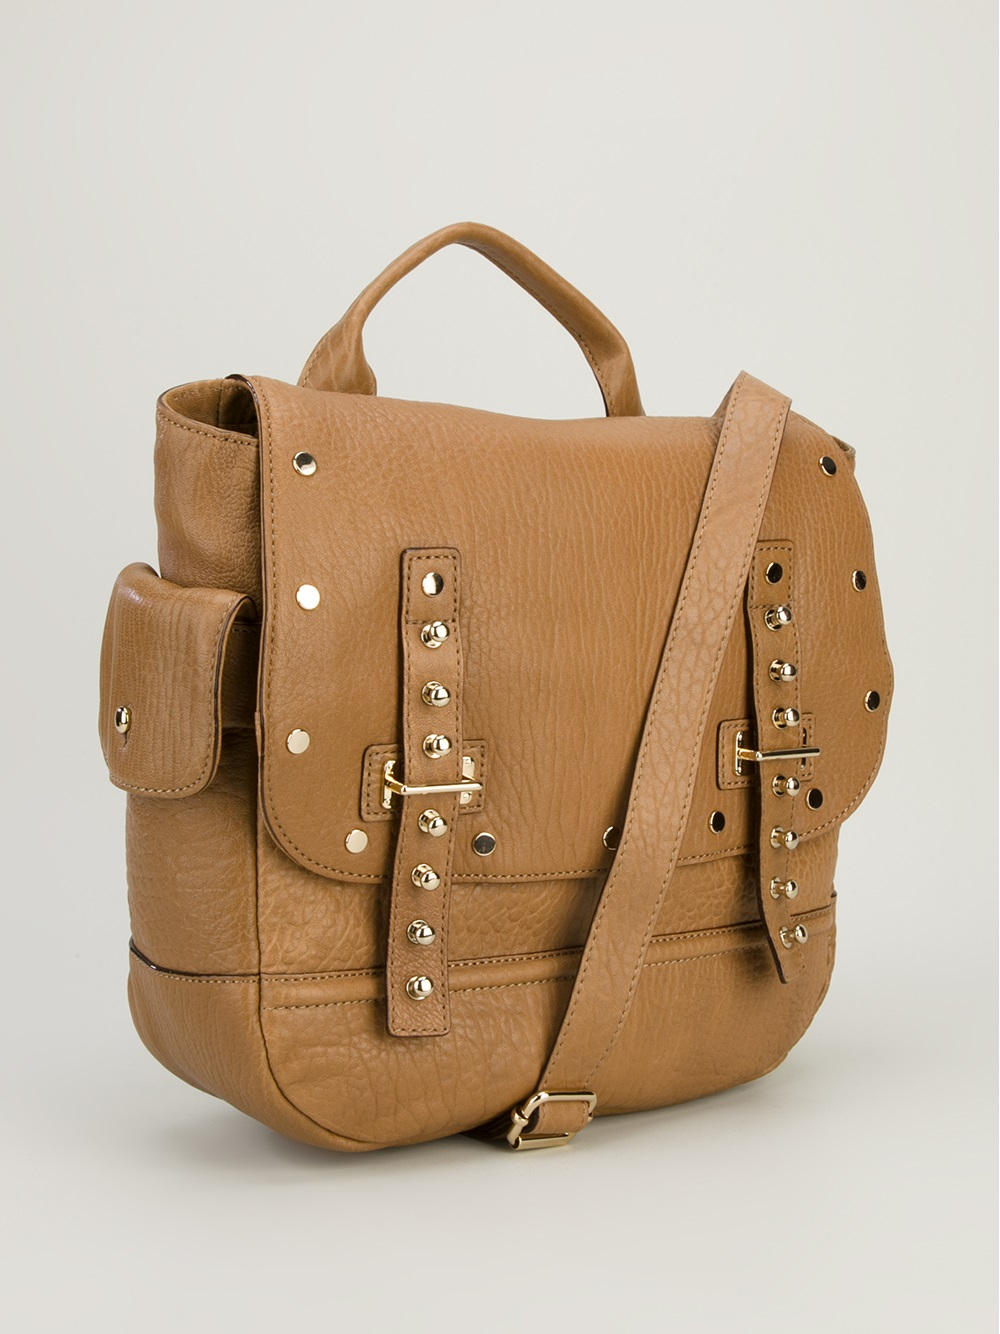 Rebecca Minkoff Studded Satchel in Natural - Lyst